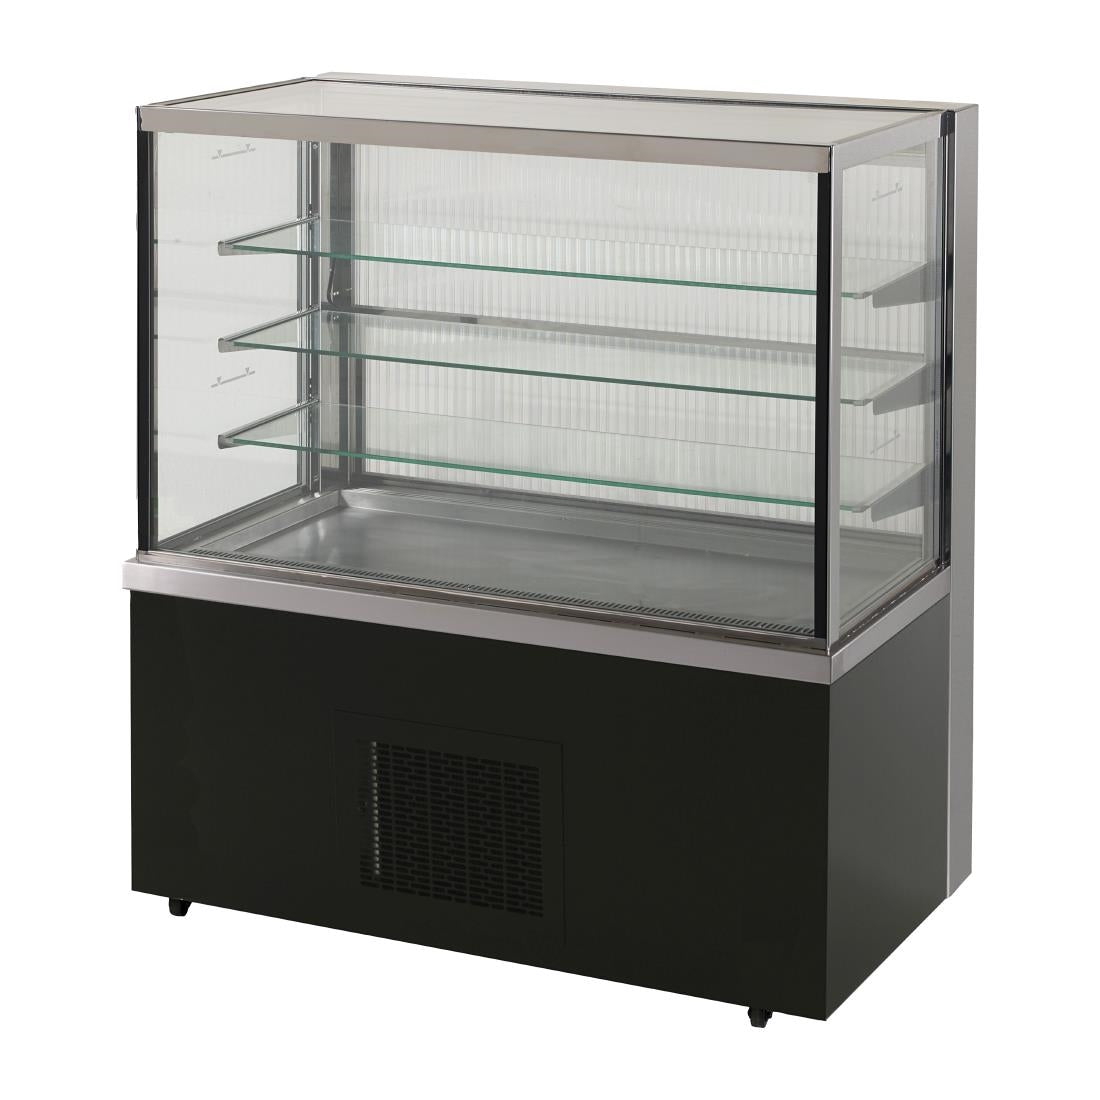 FS548 Victor Optimax SQ SMR130ECT Refrigerated Display